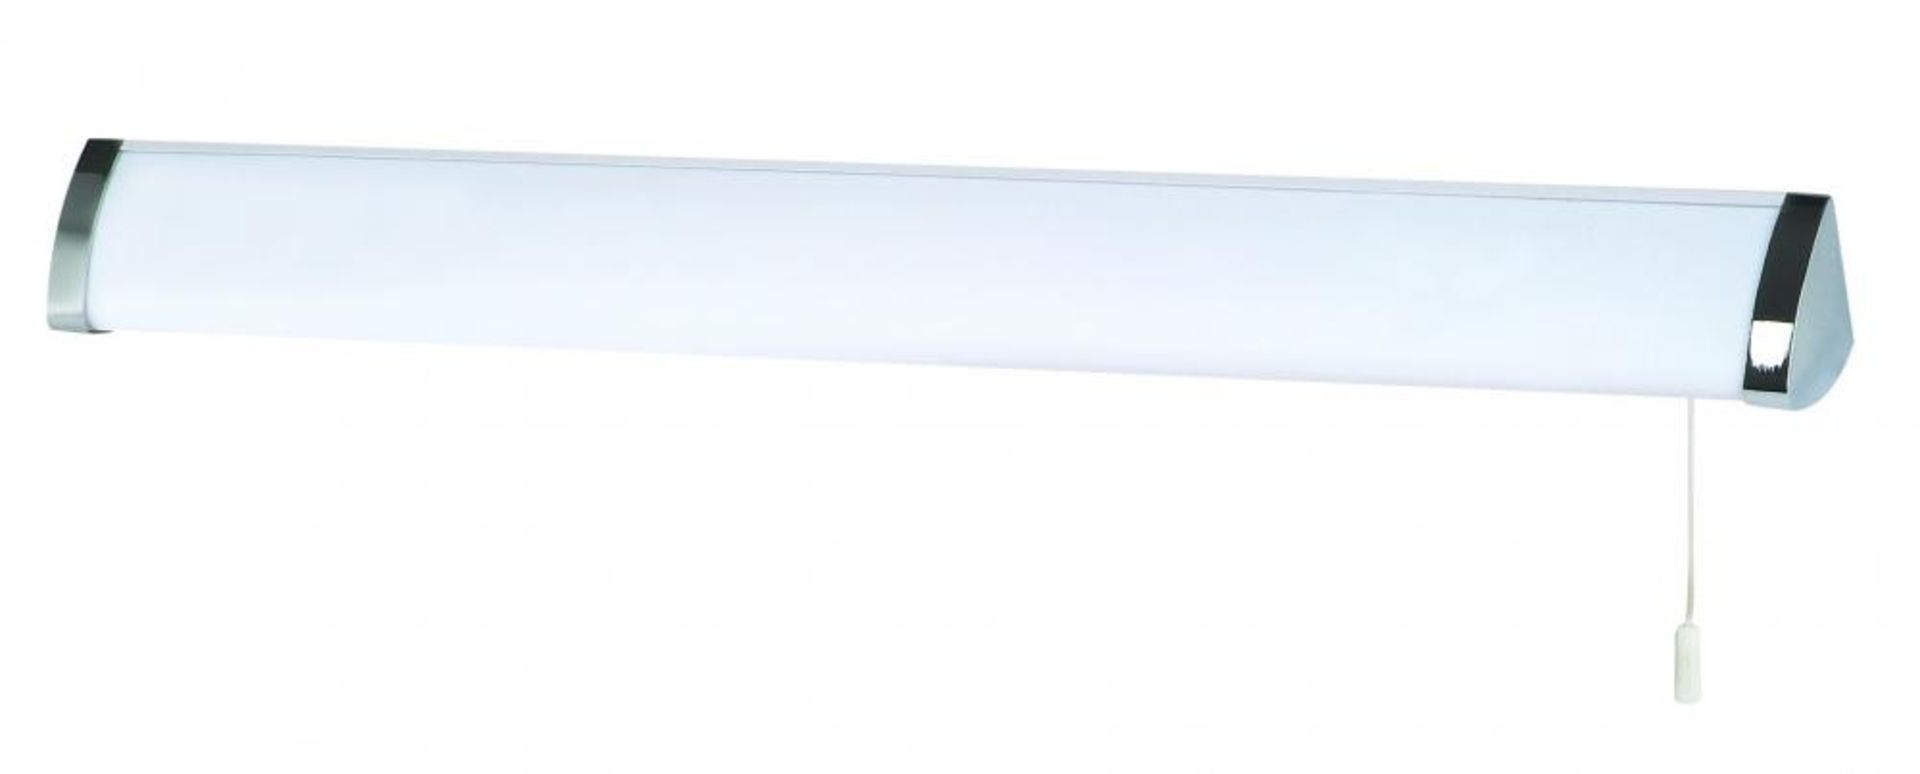 1 x IP44 Chrome Triangular Wall Light With T5 Fluorescent Tube and Polycarbonate Shade - New Boxed S